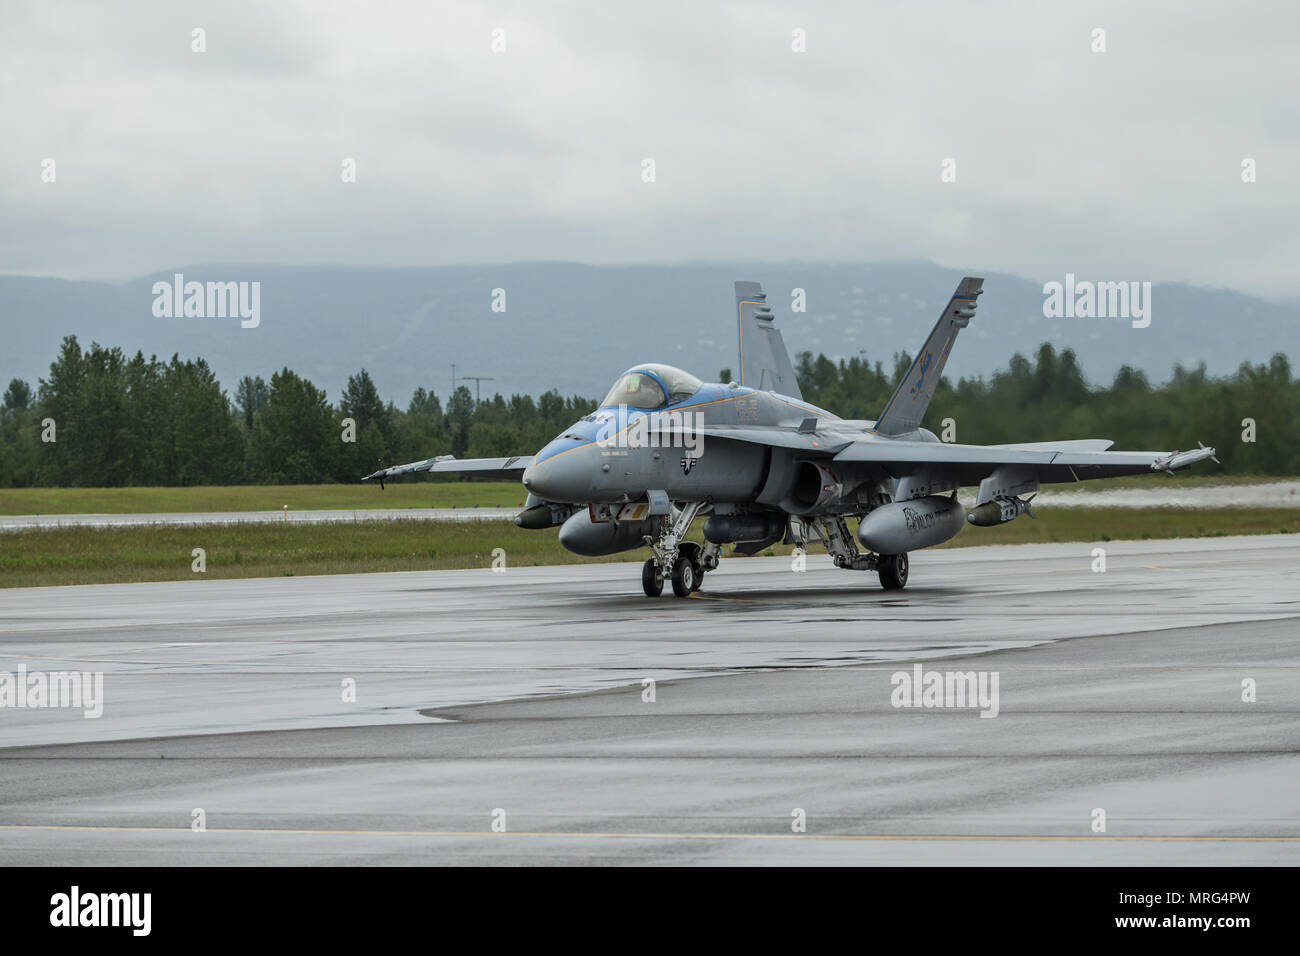 A U.S. Marine Corps F/A-18C Hornet with Marine Fighter Attack Squadron 251 is taxis down a flightline during a joint training exercise Red Flag-Alaska 17-2 on Joint Base Elmendorf-Richardson, Alaska, June 13, 2017. Red Flag-Alaska provides an optimal training environment in the Indo-Asian Pacific region and focuses on improving ground, space, and cyberspace combat readiness and interoperability for U.S. and international forces. (U.S. Marine Corps photo by Lance Cpl. Koby I. Saunders) Stock Photo